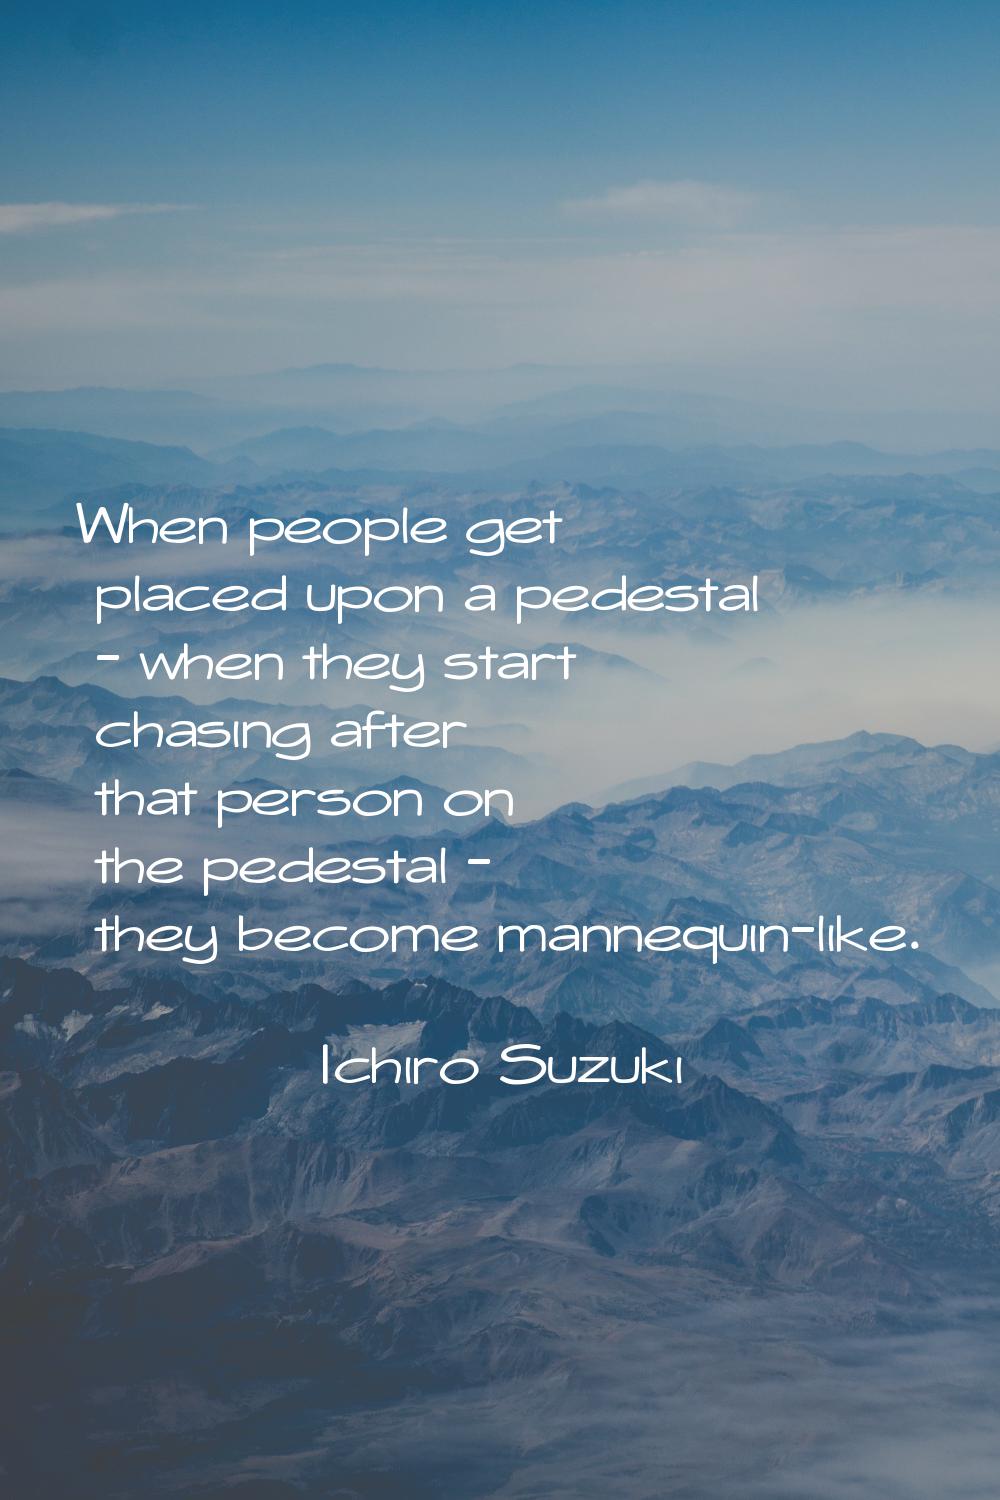 When people get placed upon a pedestal - when they start chasing after that person on the pedestal 